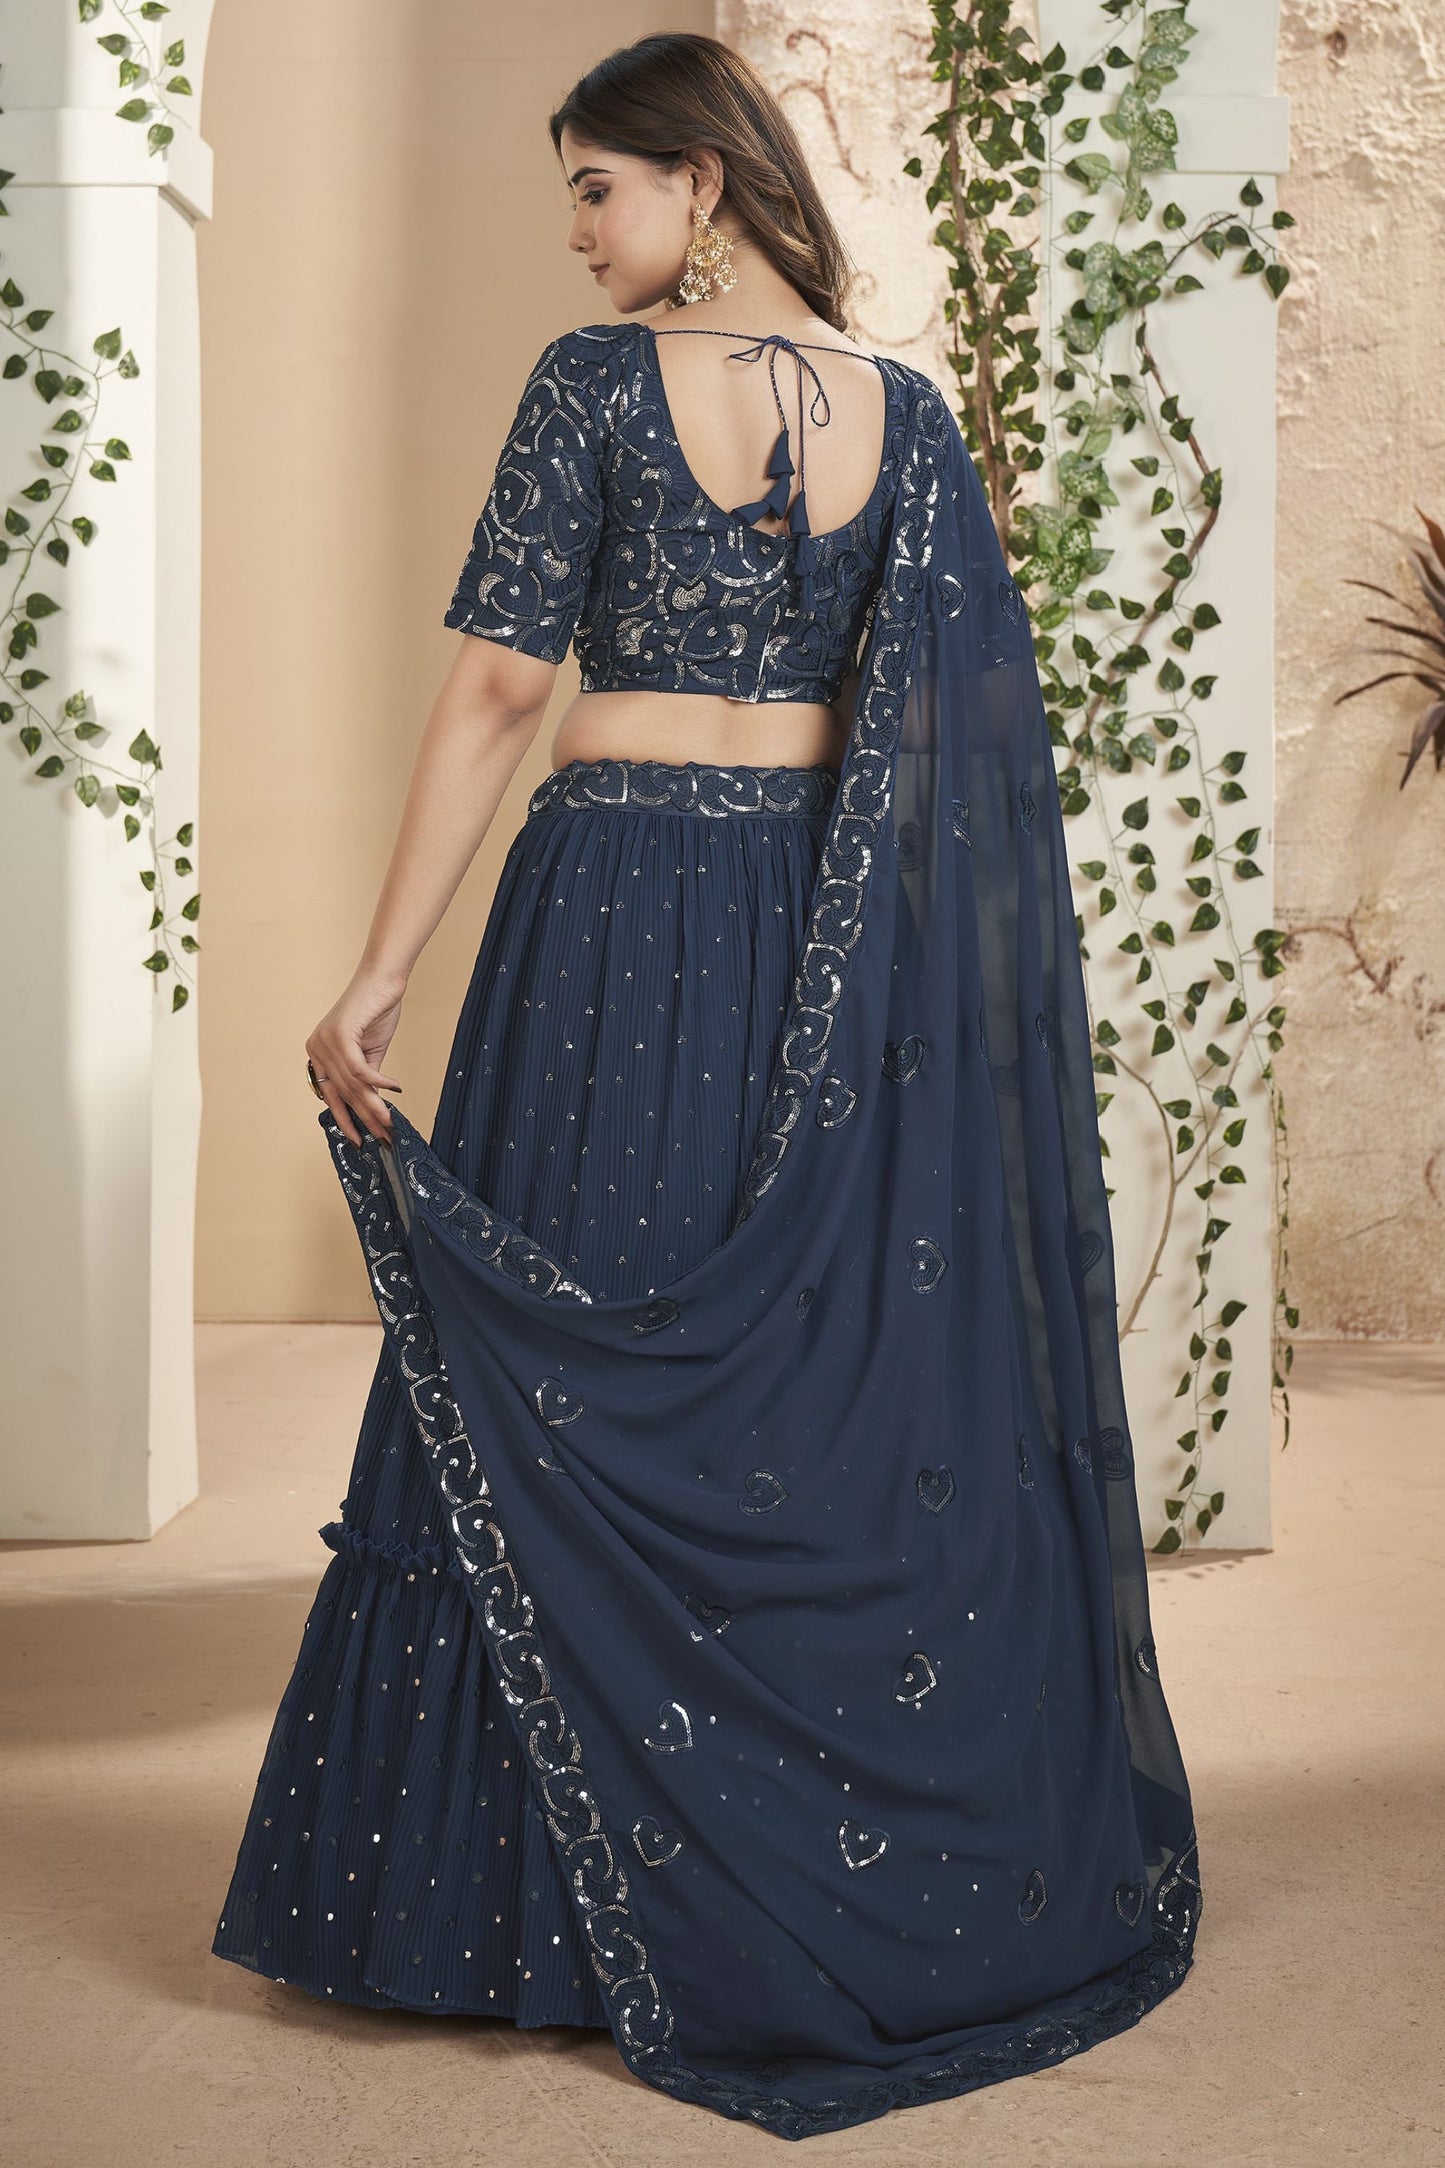 Blue Georgette Ruffle Lehenga Choli 9 Meter Flair For Indian Festivals & Weddings - Sequence Embroidery Work, Thread Embroidery Work,